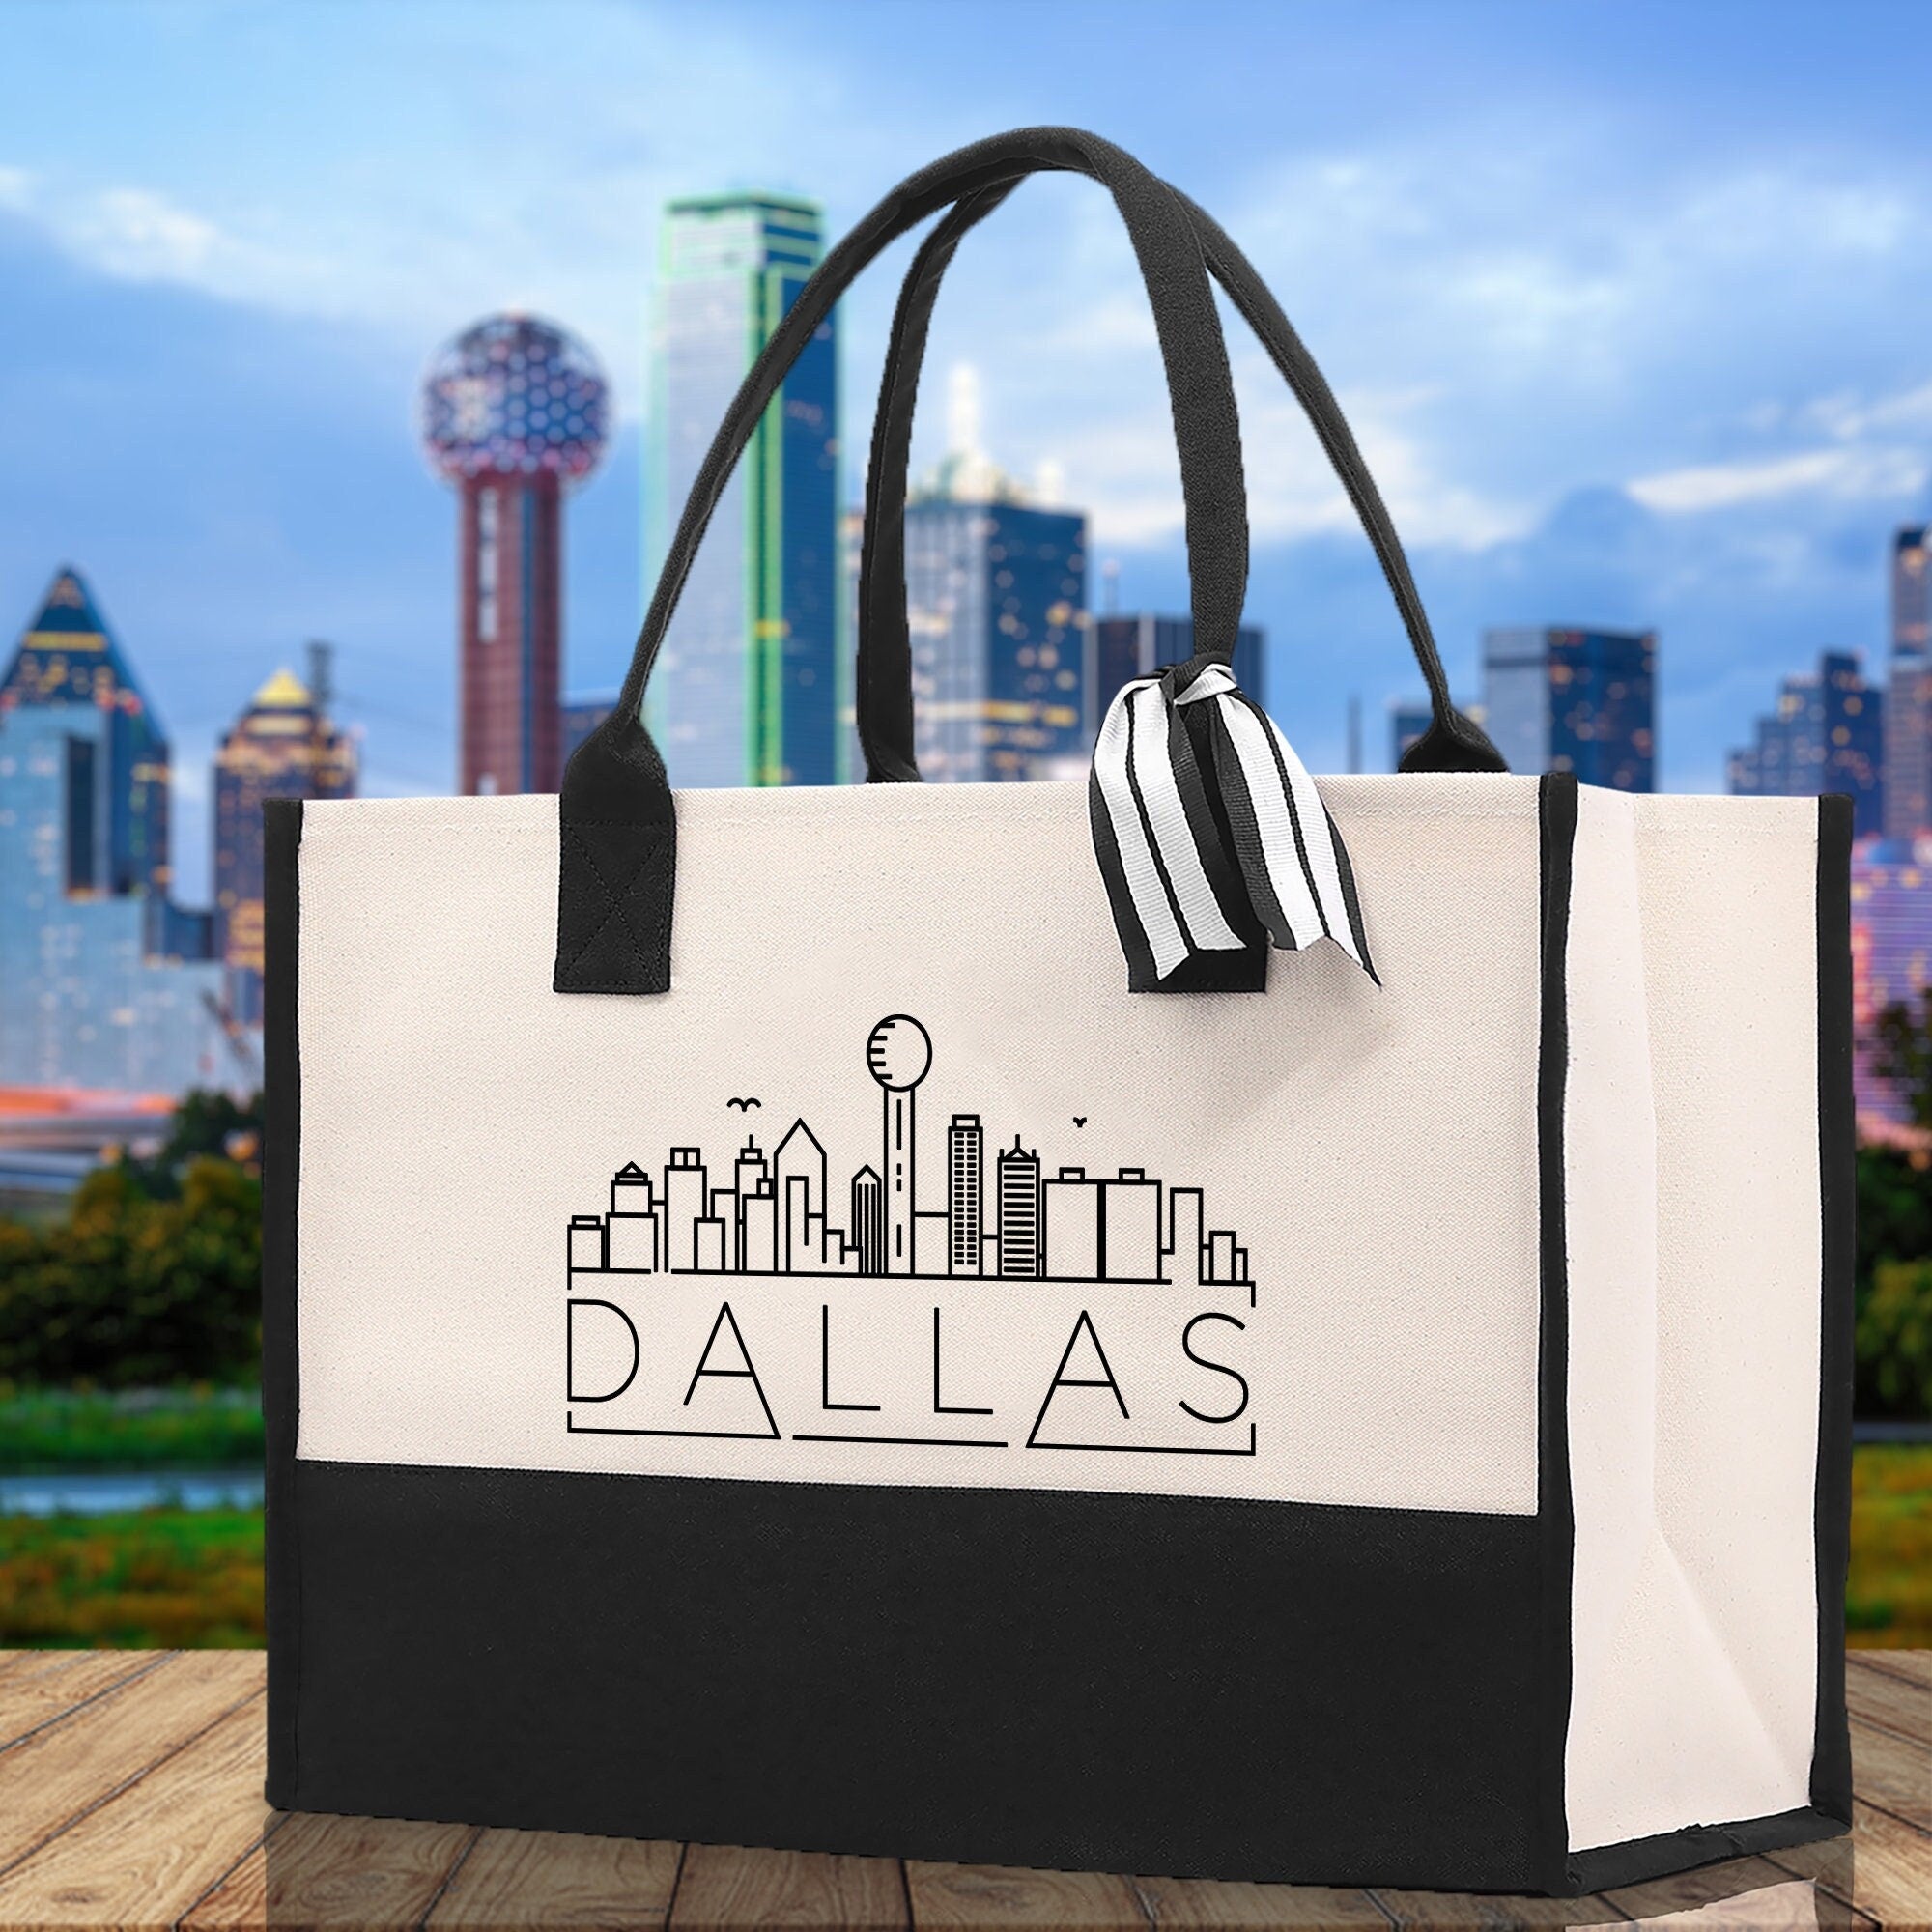 Dallas Cotton Canvas Tote Bag Travel Vacation Tote Employee and Client Gift Wedding Favor Birthday Welcome Tote Bag Bridesmaid Gift